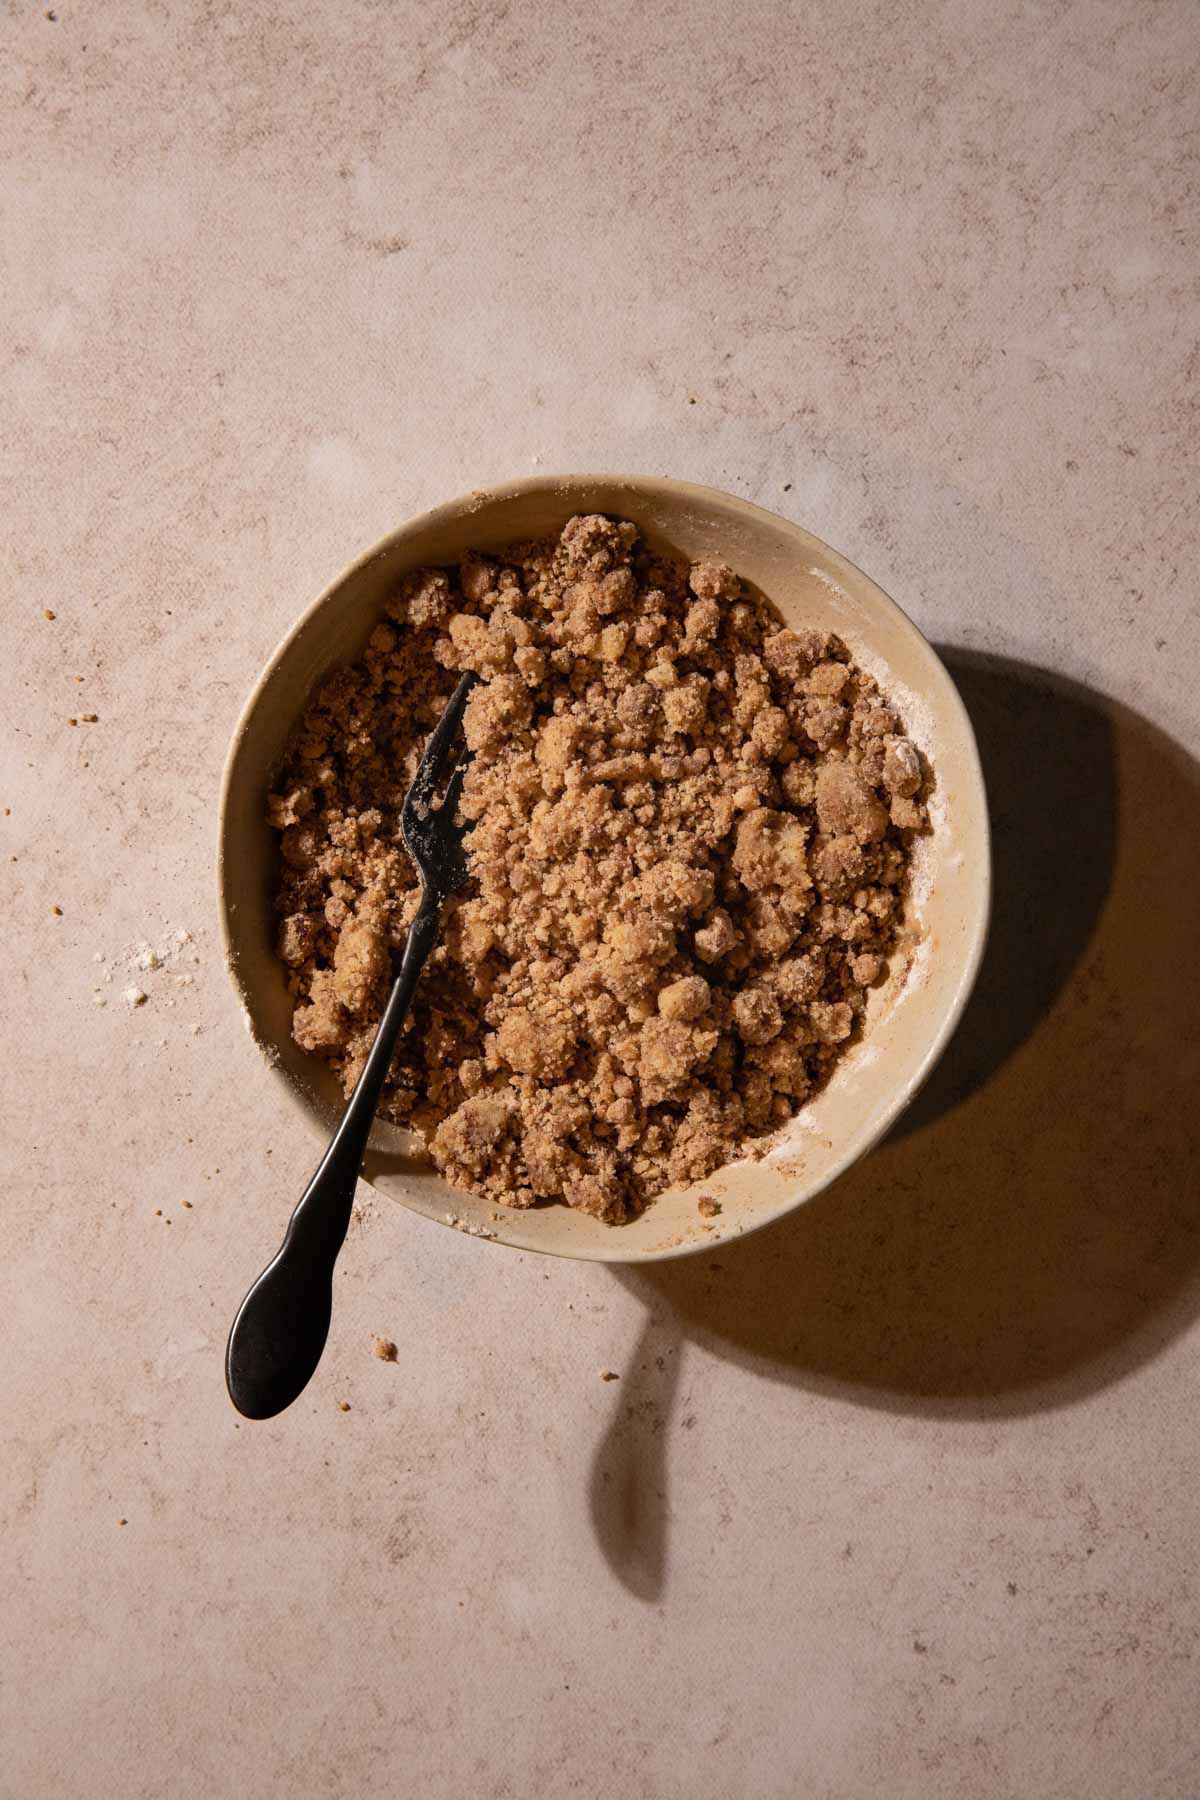 Streusel mixture in a bowl with a fork